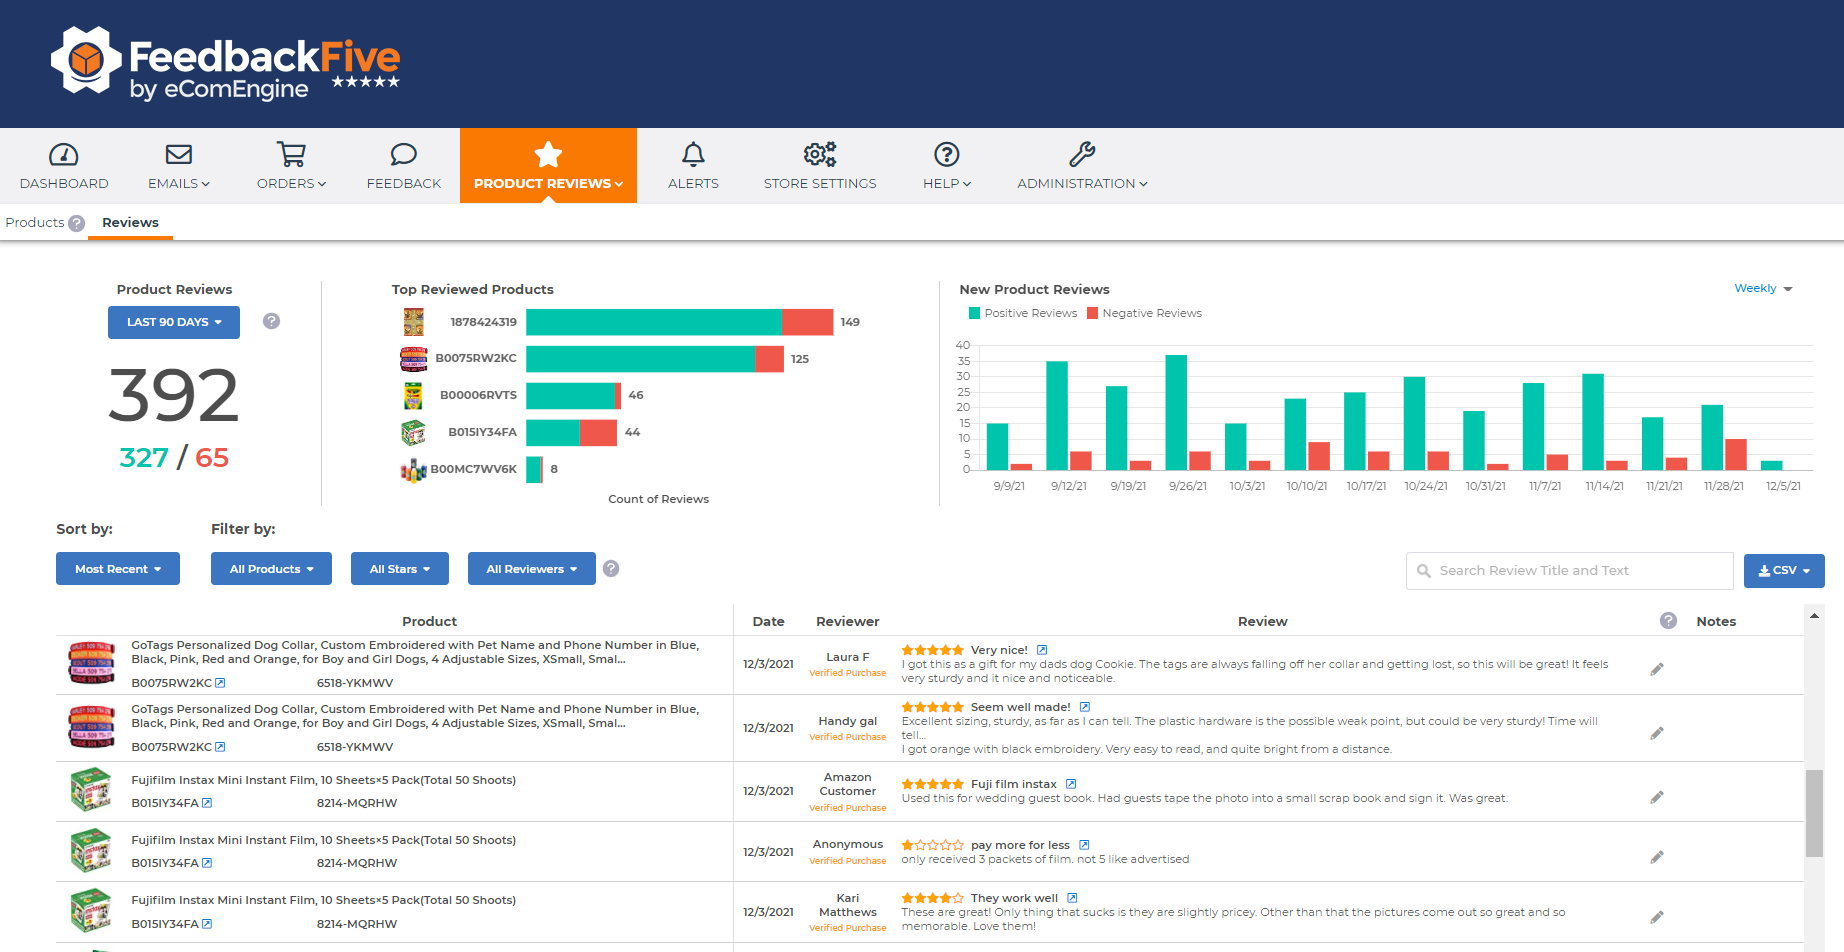 Reviews page on the FeedbackFive product reviews dashboard